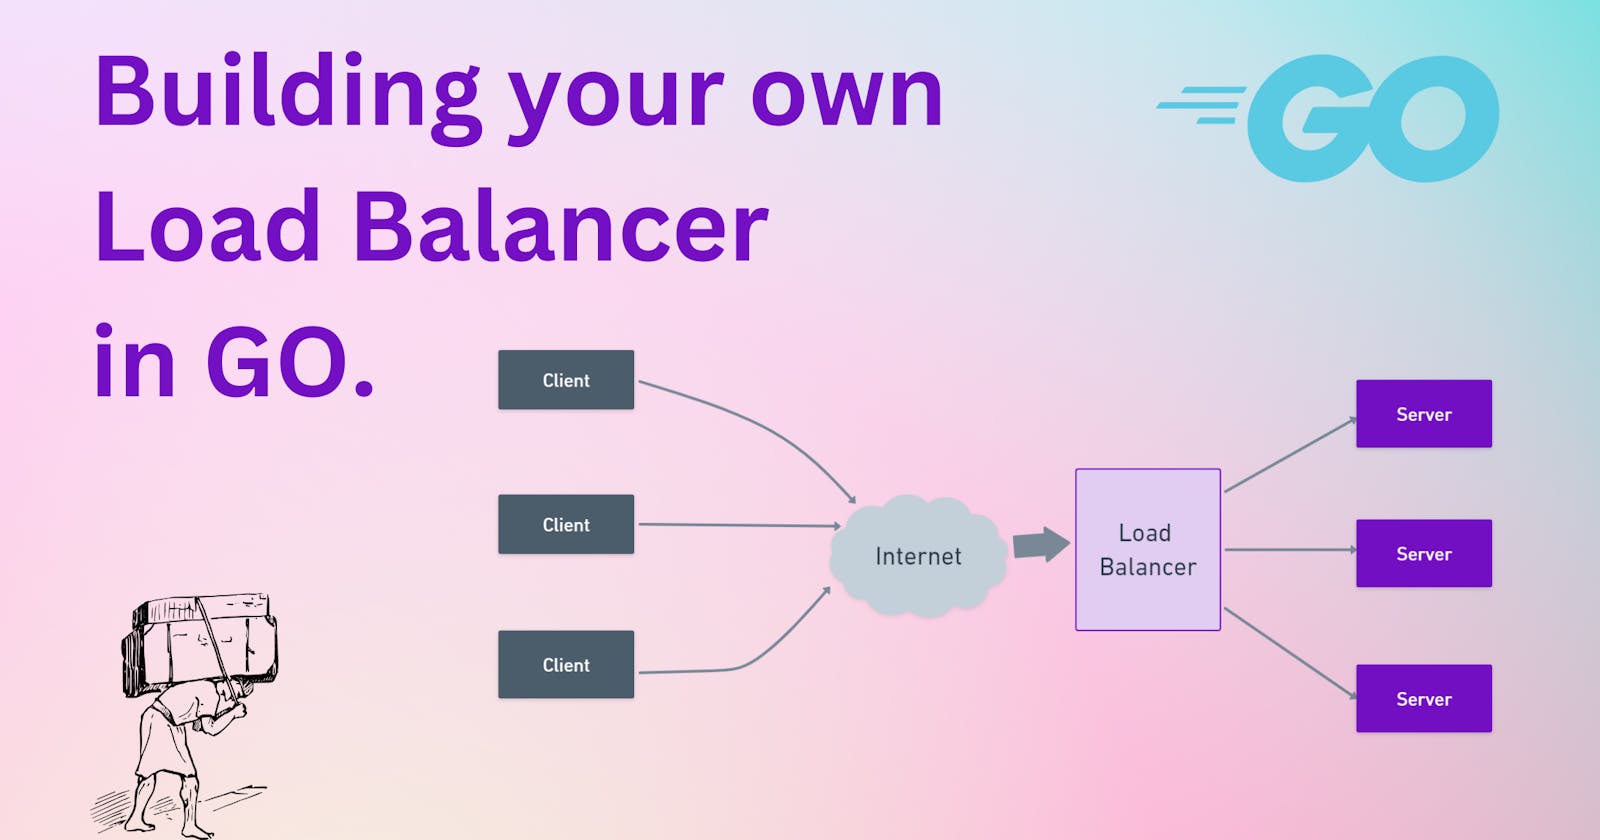 Building Your Own Load Balancer In GO.